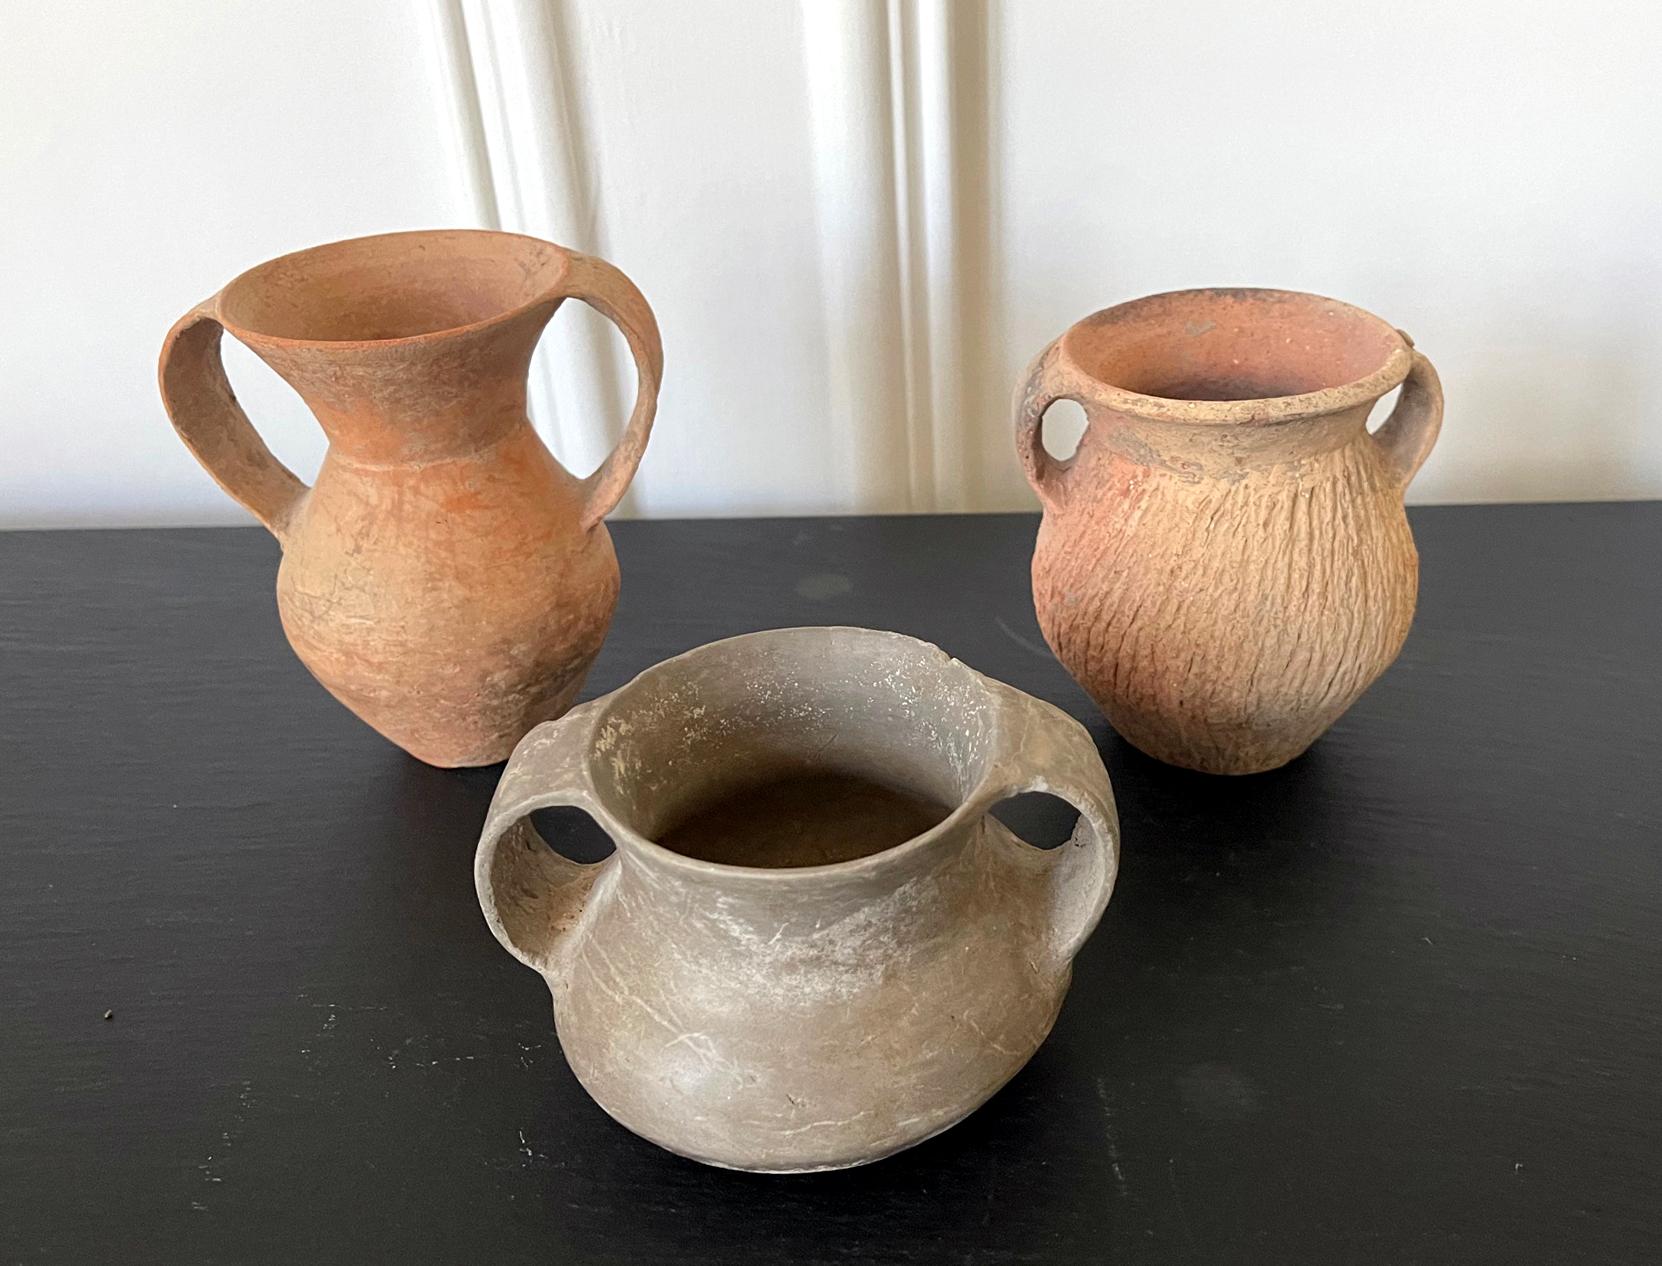 A collection of three small Chinese Neolithic pottery jars consisting a red slender jar with large double ears, a grey and wide short jar with double ears and a more stocky jar with thick wall and engrave-decorated surface. They are all low fired